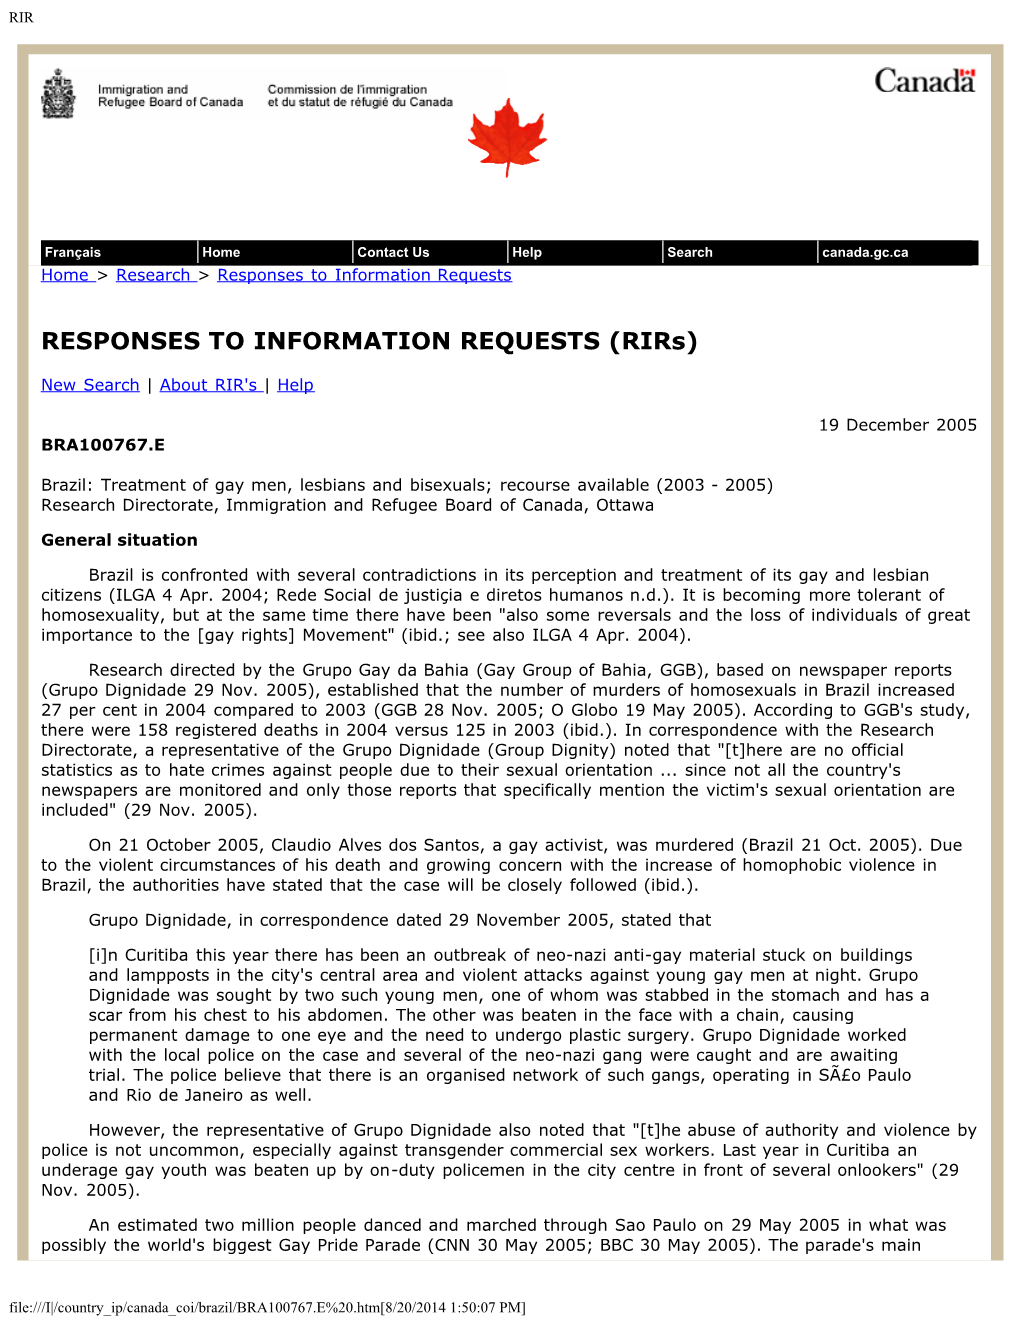 Brazil: Treatment of Gay Men, Lesbians and Bisexuals; Recourse Available (2003 - 2005) Research Directorate, Immigration and Refugee Board of Canada, Ottawa